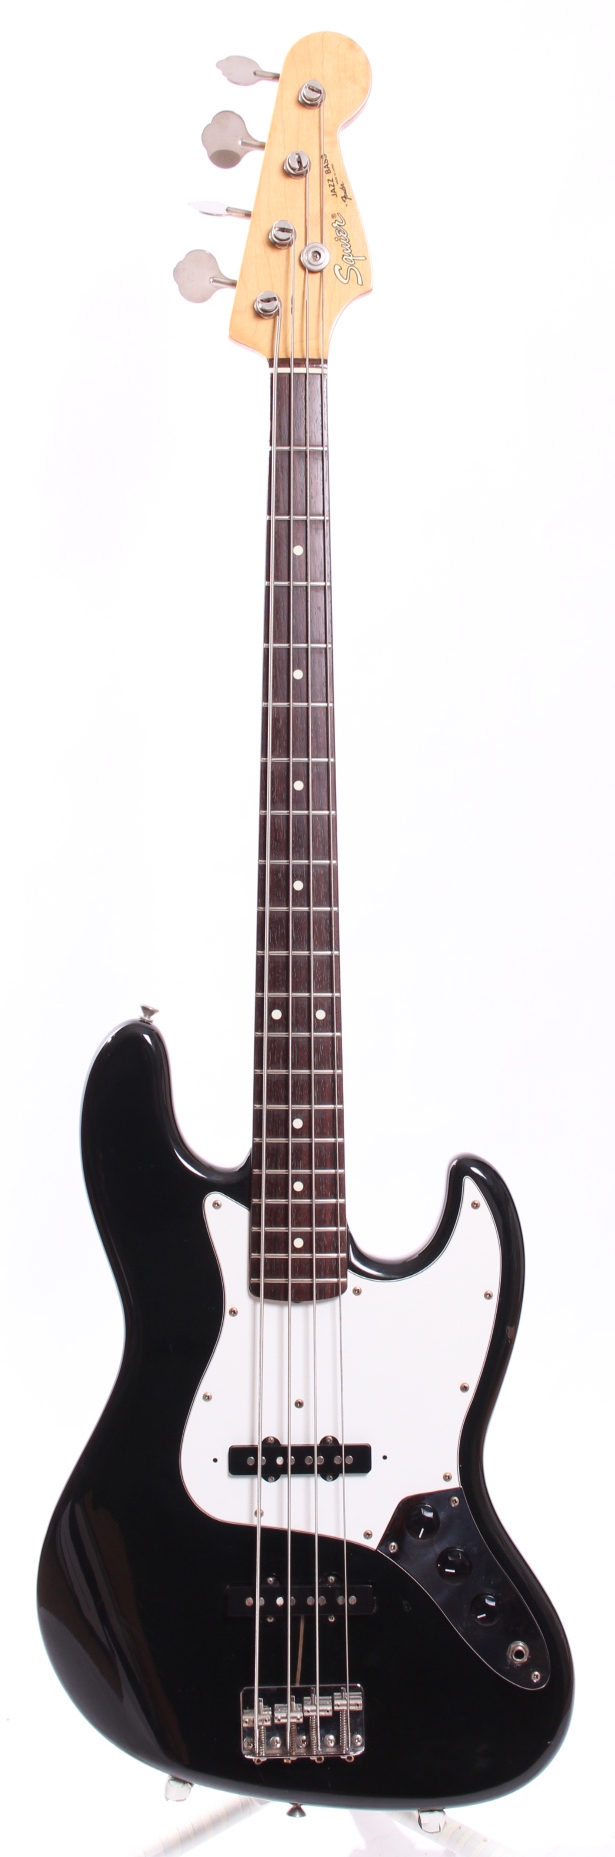 Squier By Fender Japan Jazz Bass 62 Reissue 1985 Black Bass For Sale